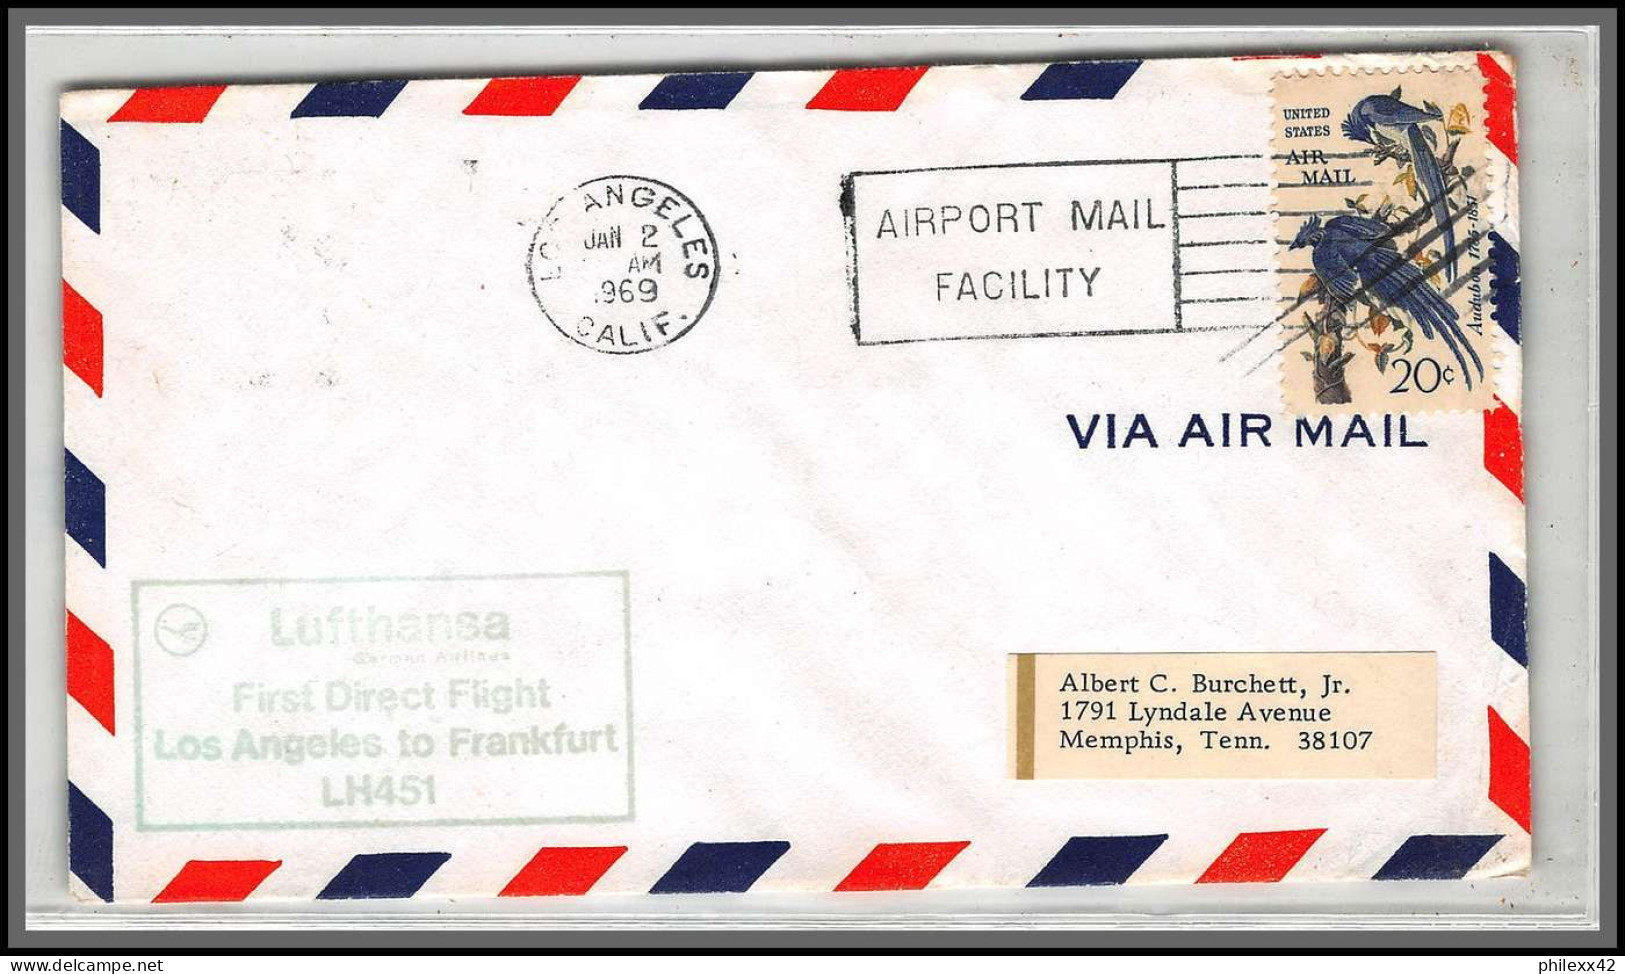 12560 Lh451 Los Angeles Frankfurt 2/1/1969 Premier Vol First Direct Lufthansa Flight Lettre Airmail Cover Usa Aviation - 3c. 1961-... Covers